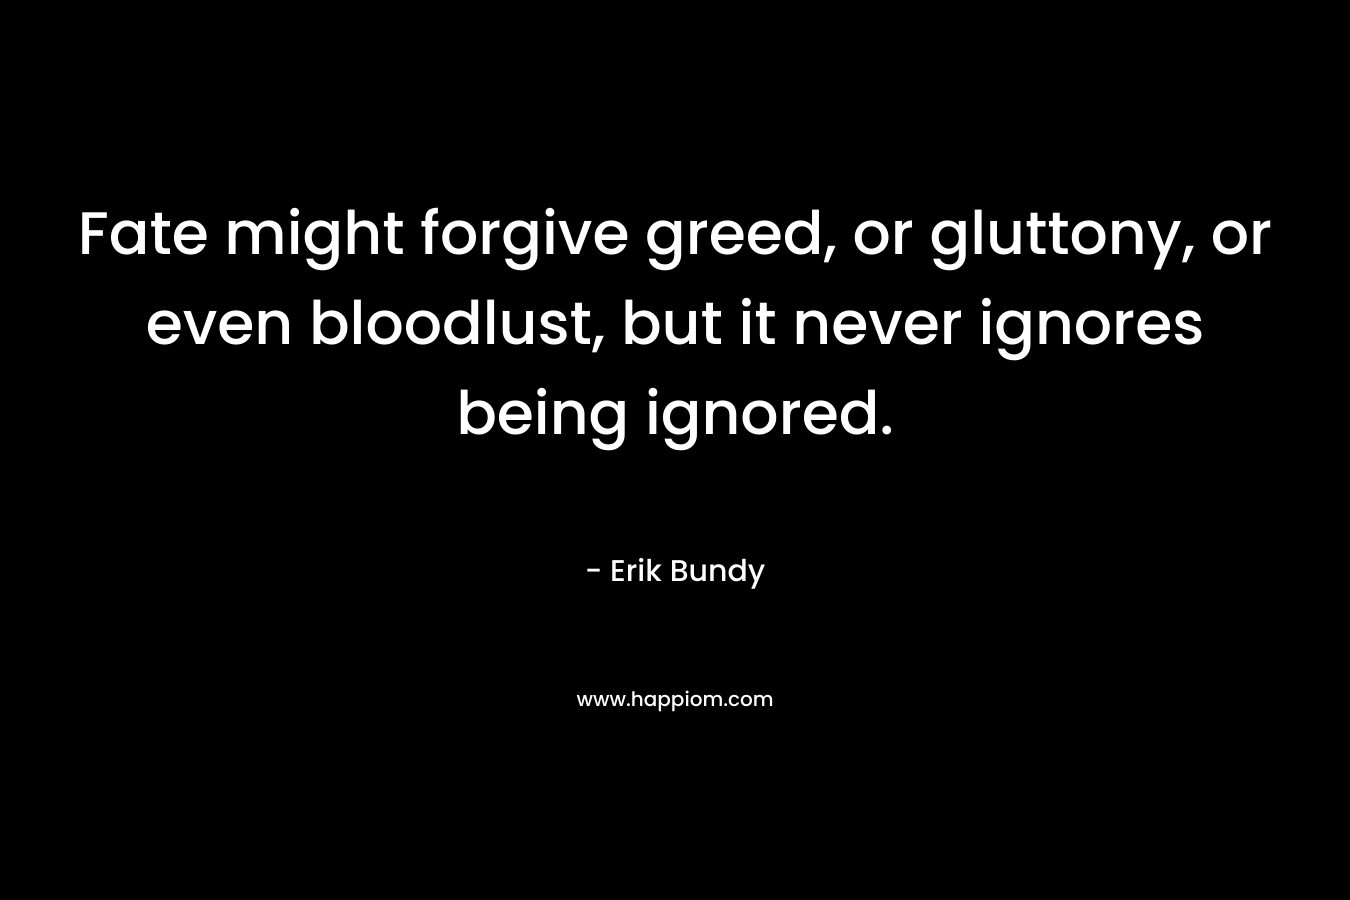 Fate might forgive greed, or gluttony, or even bloodlust, but it never ignores being ignored. – Erik Bundy